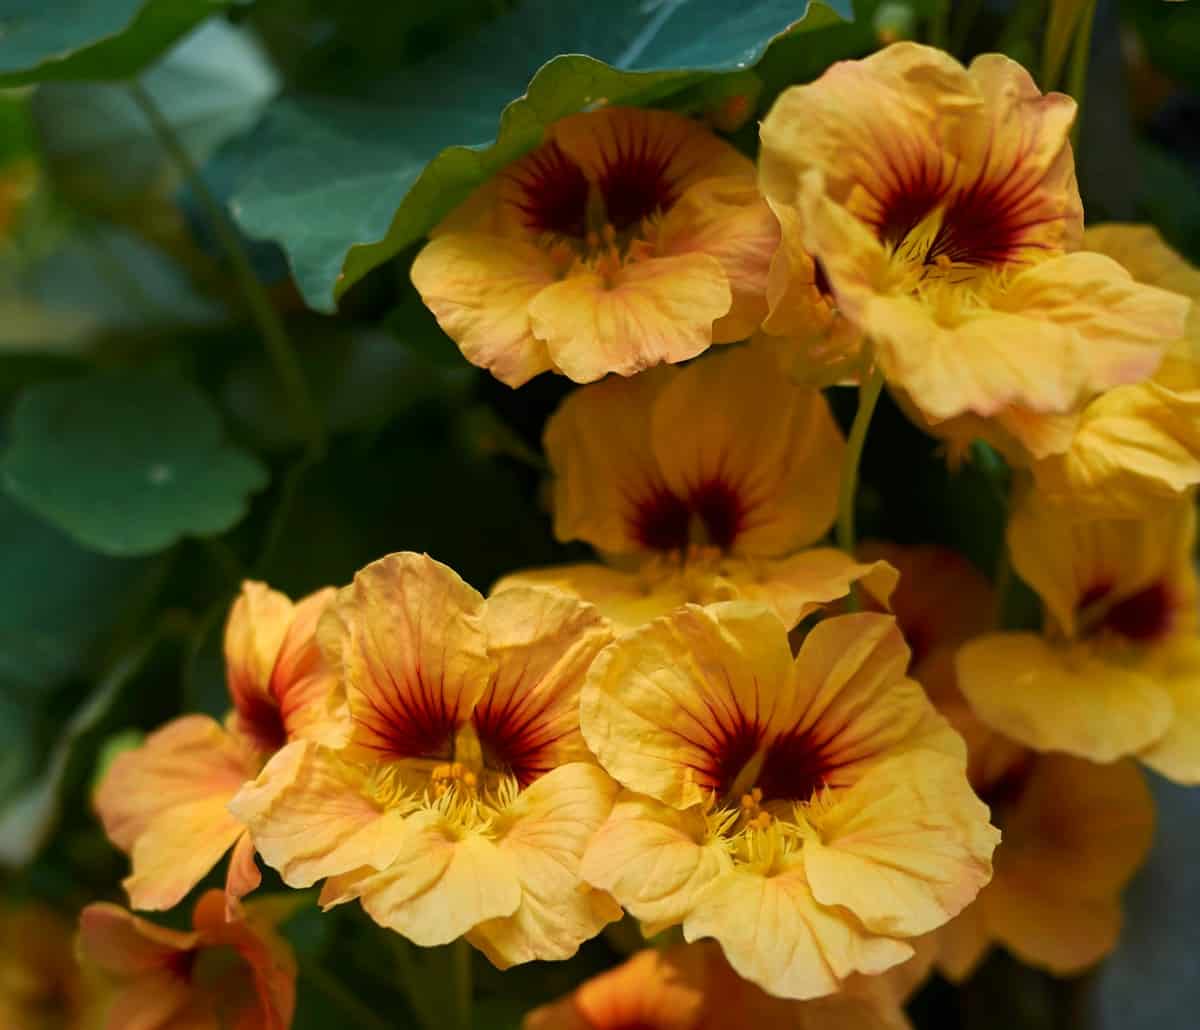 The flowers and leaves of the nasturtium are edible.